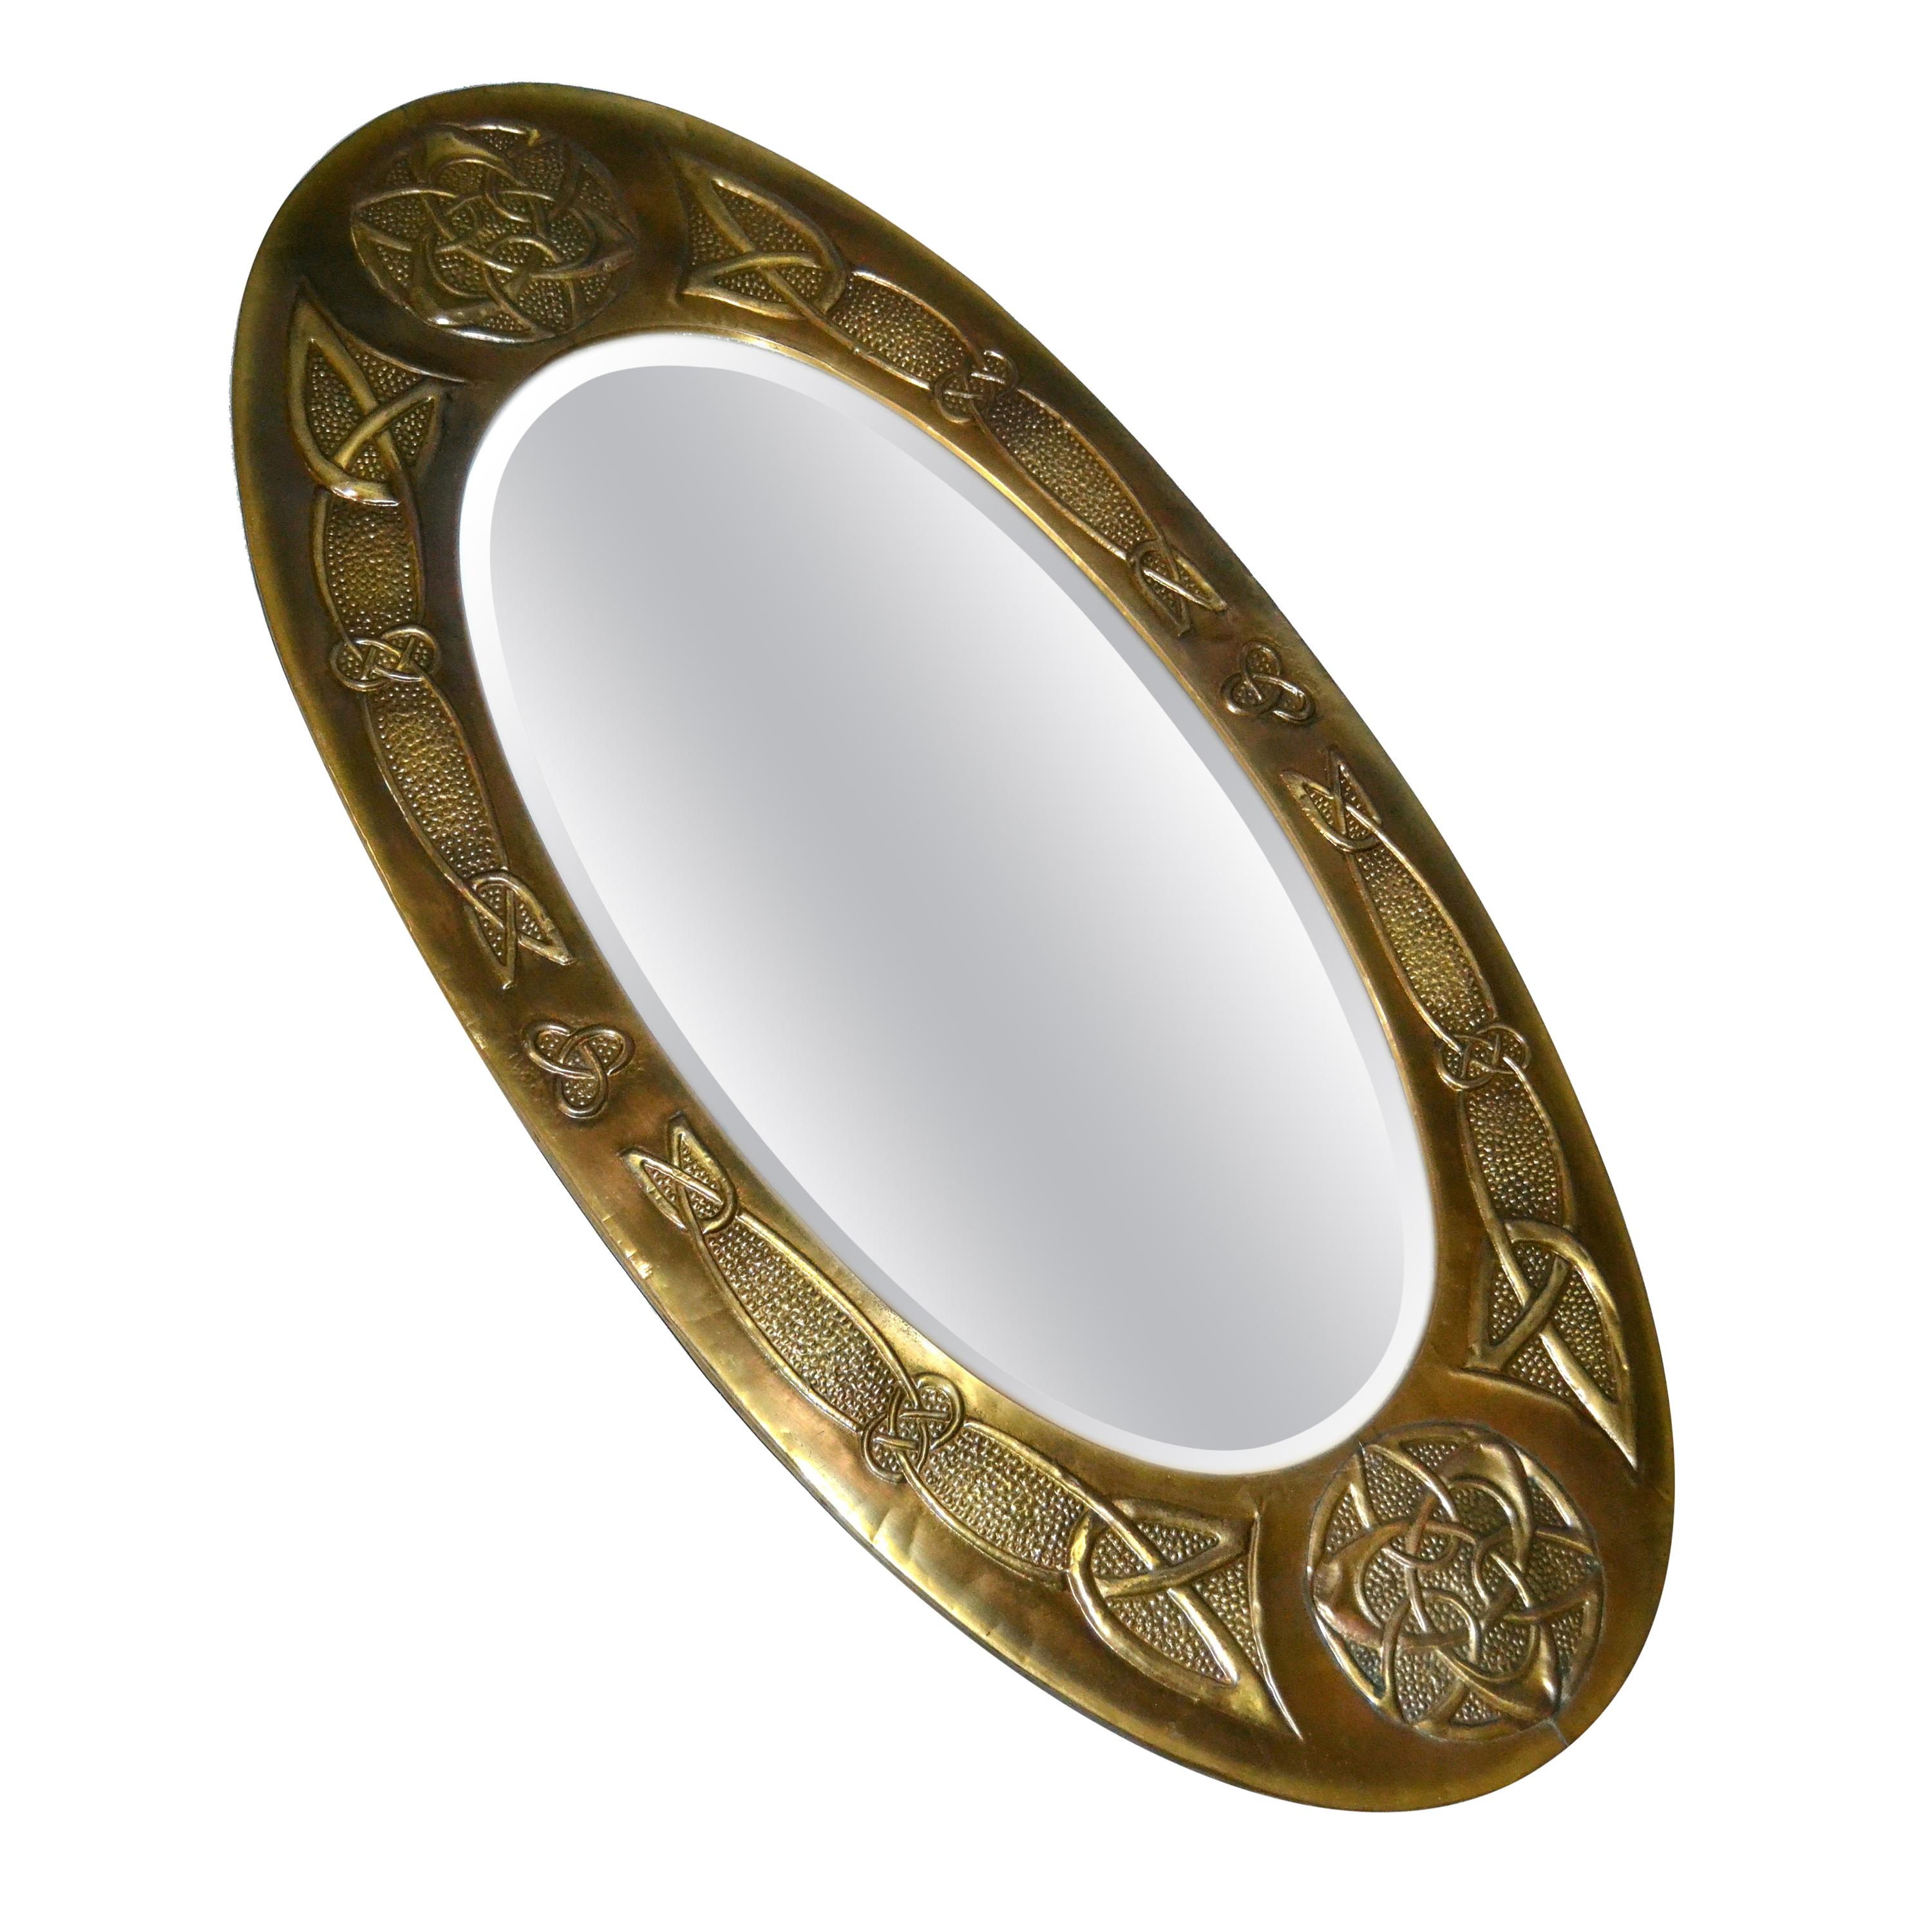 Arts and Crafts Celtic Knot Design Oval Bronze Wall Mirror from United Kingdom 